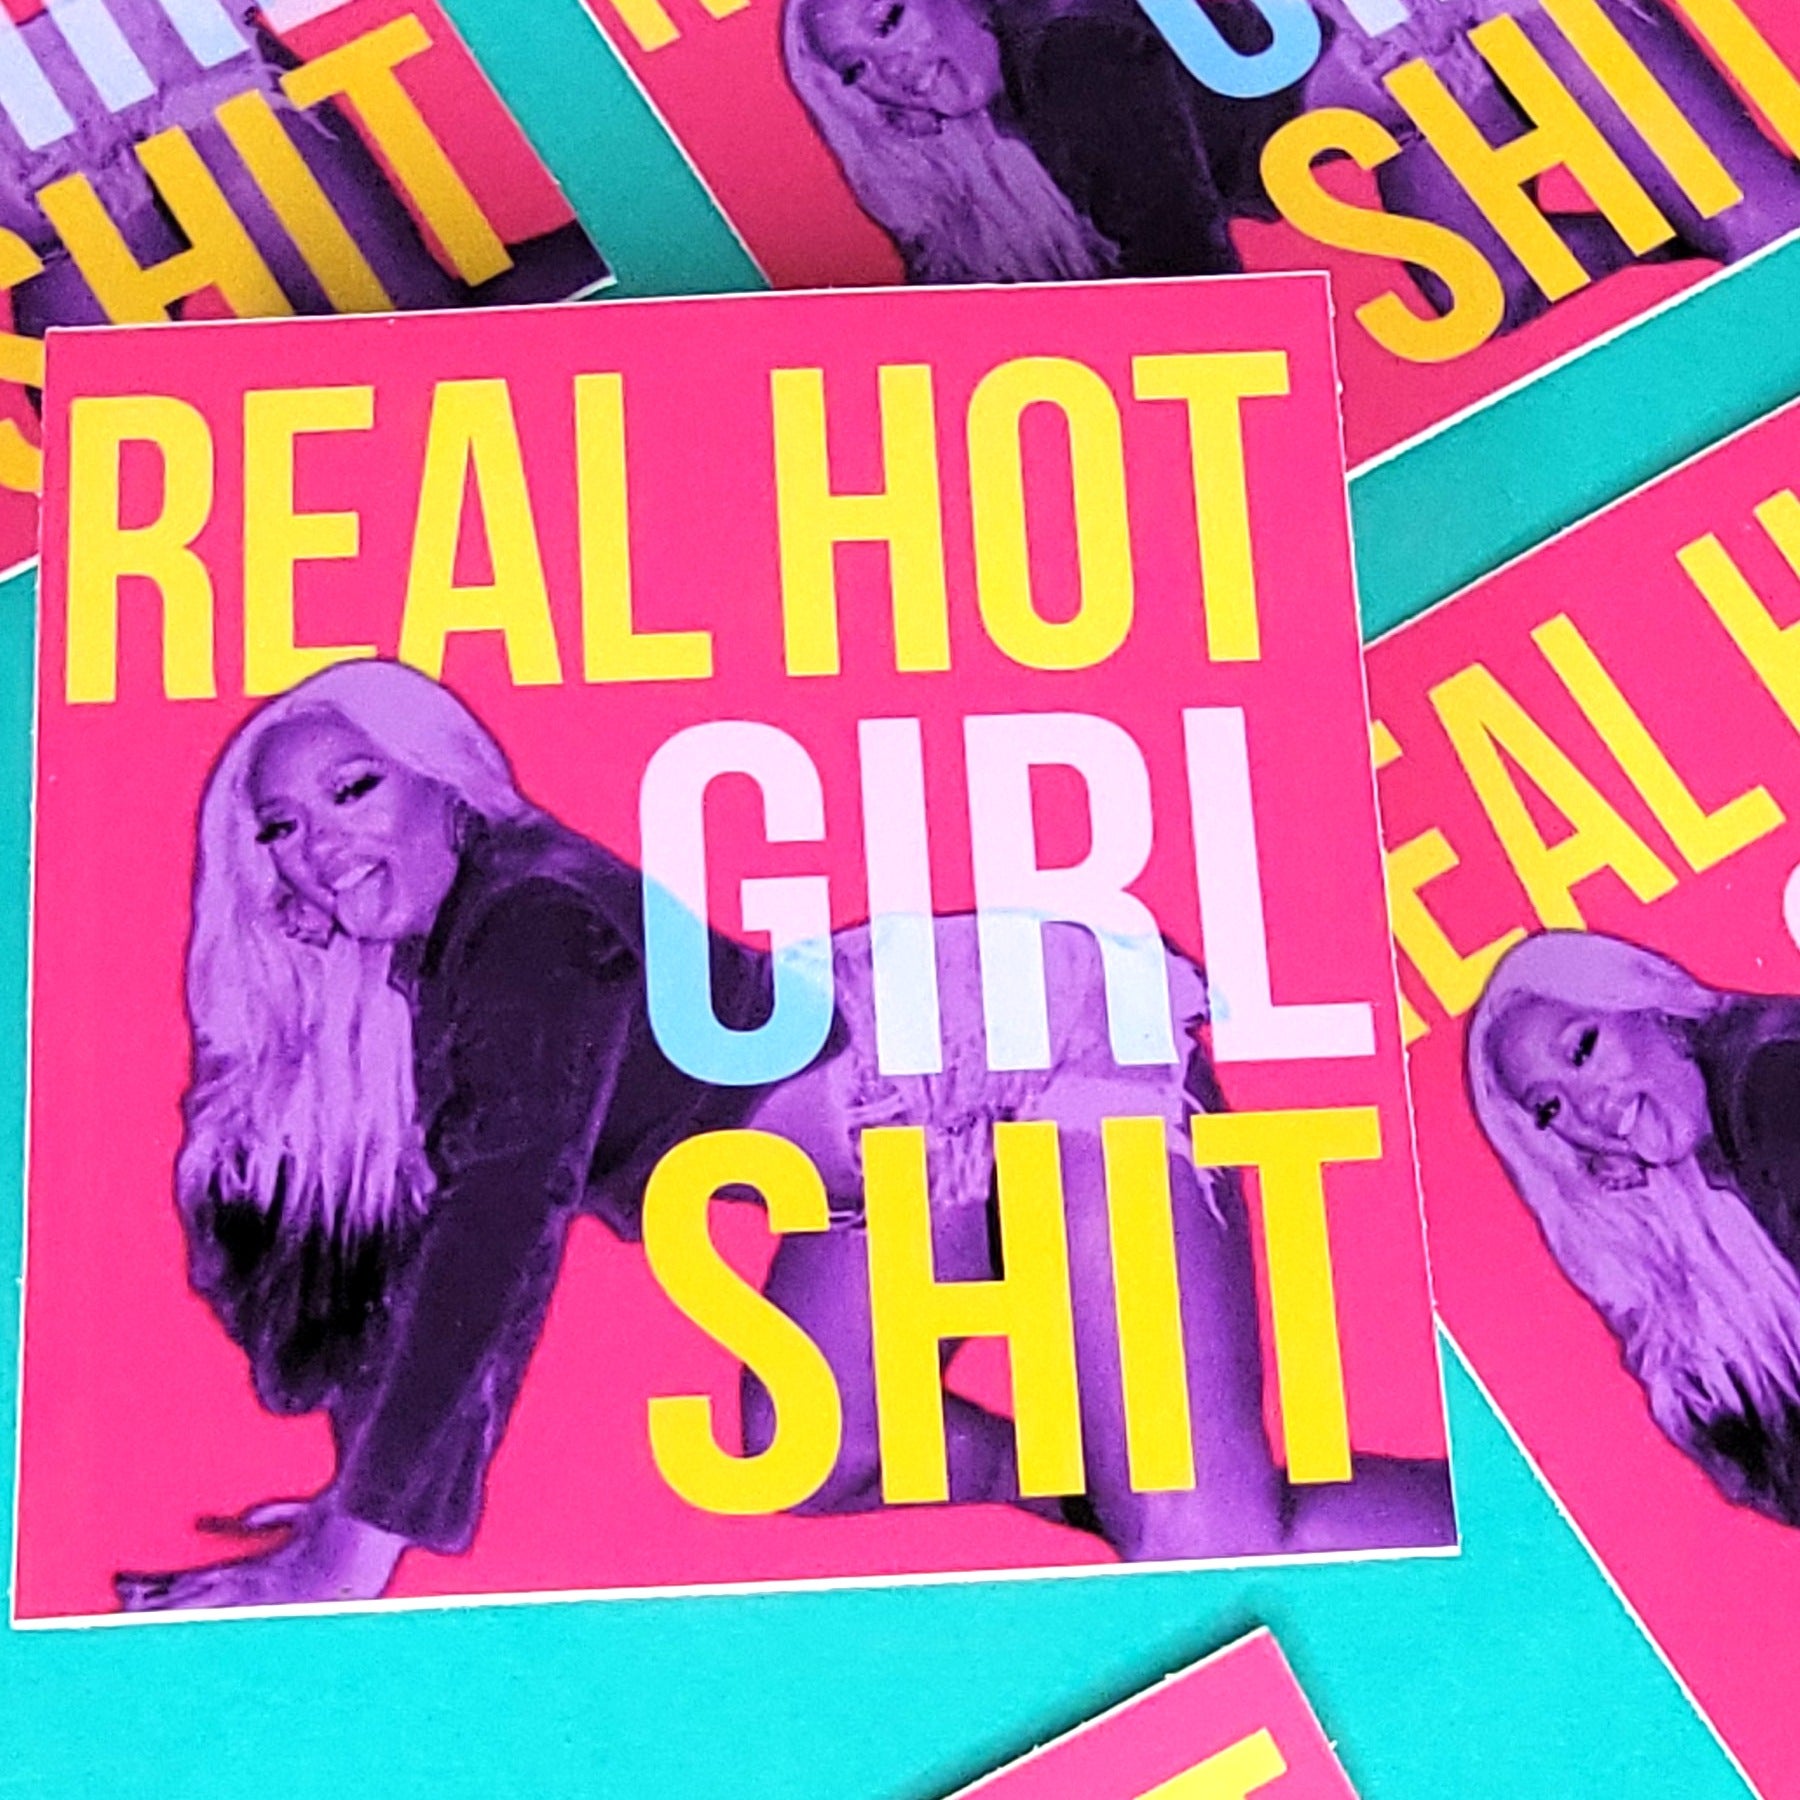 REAL HOT STICKER